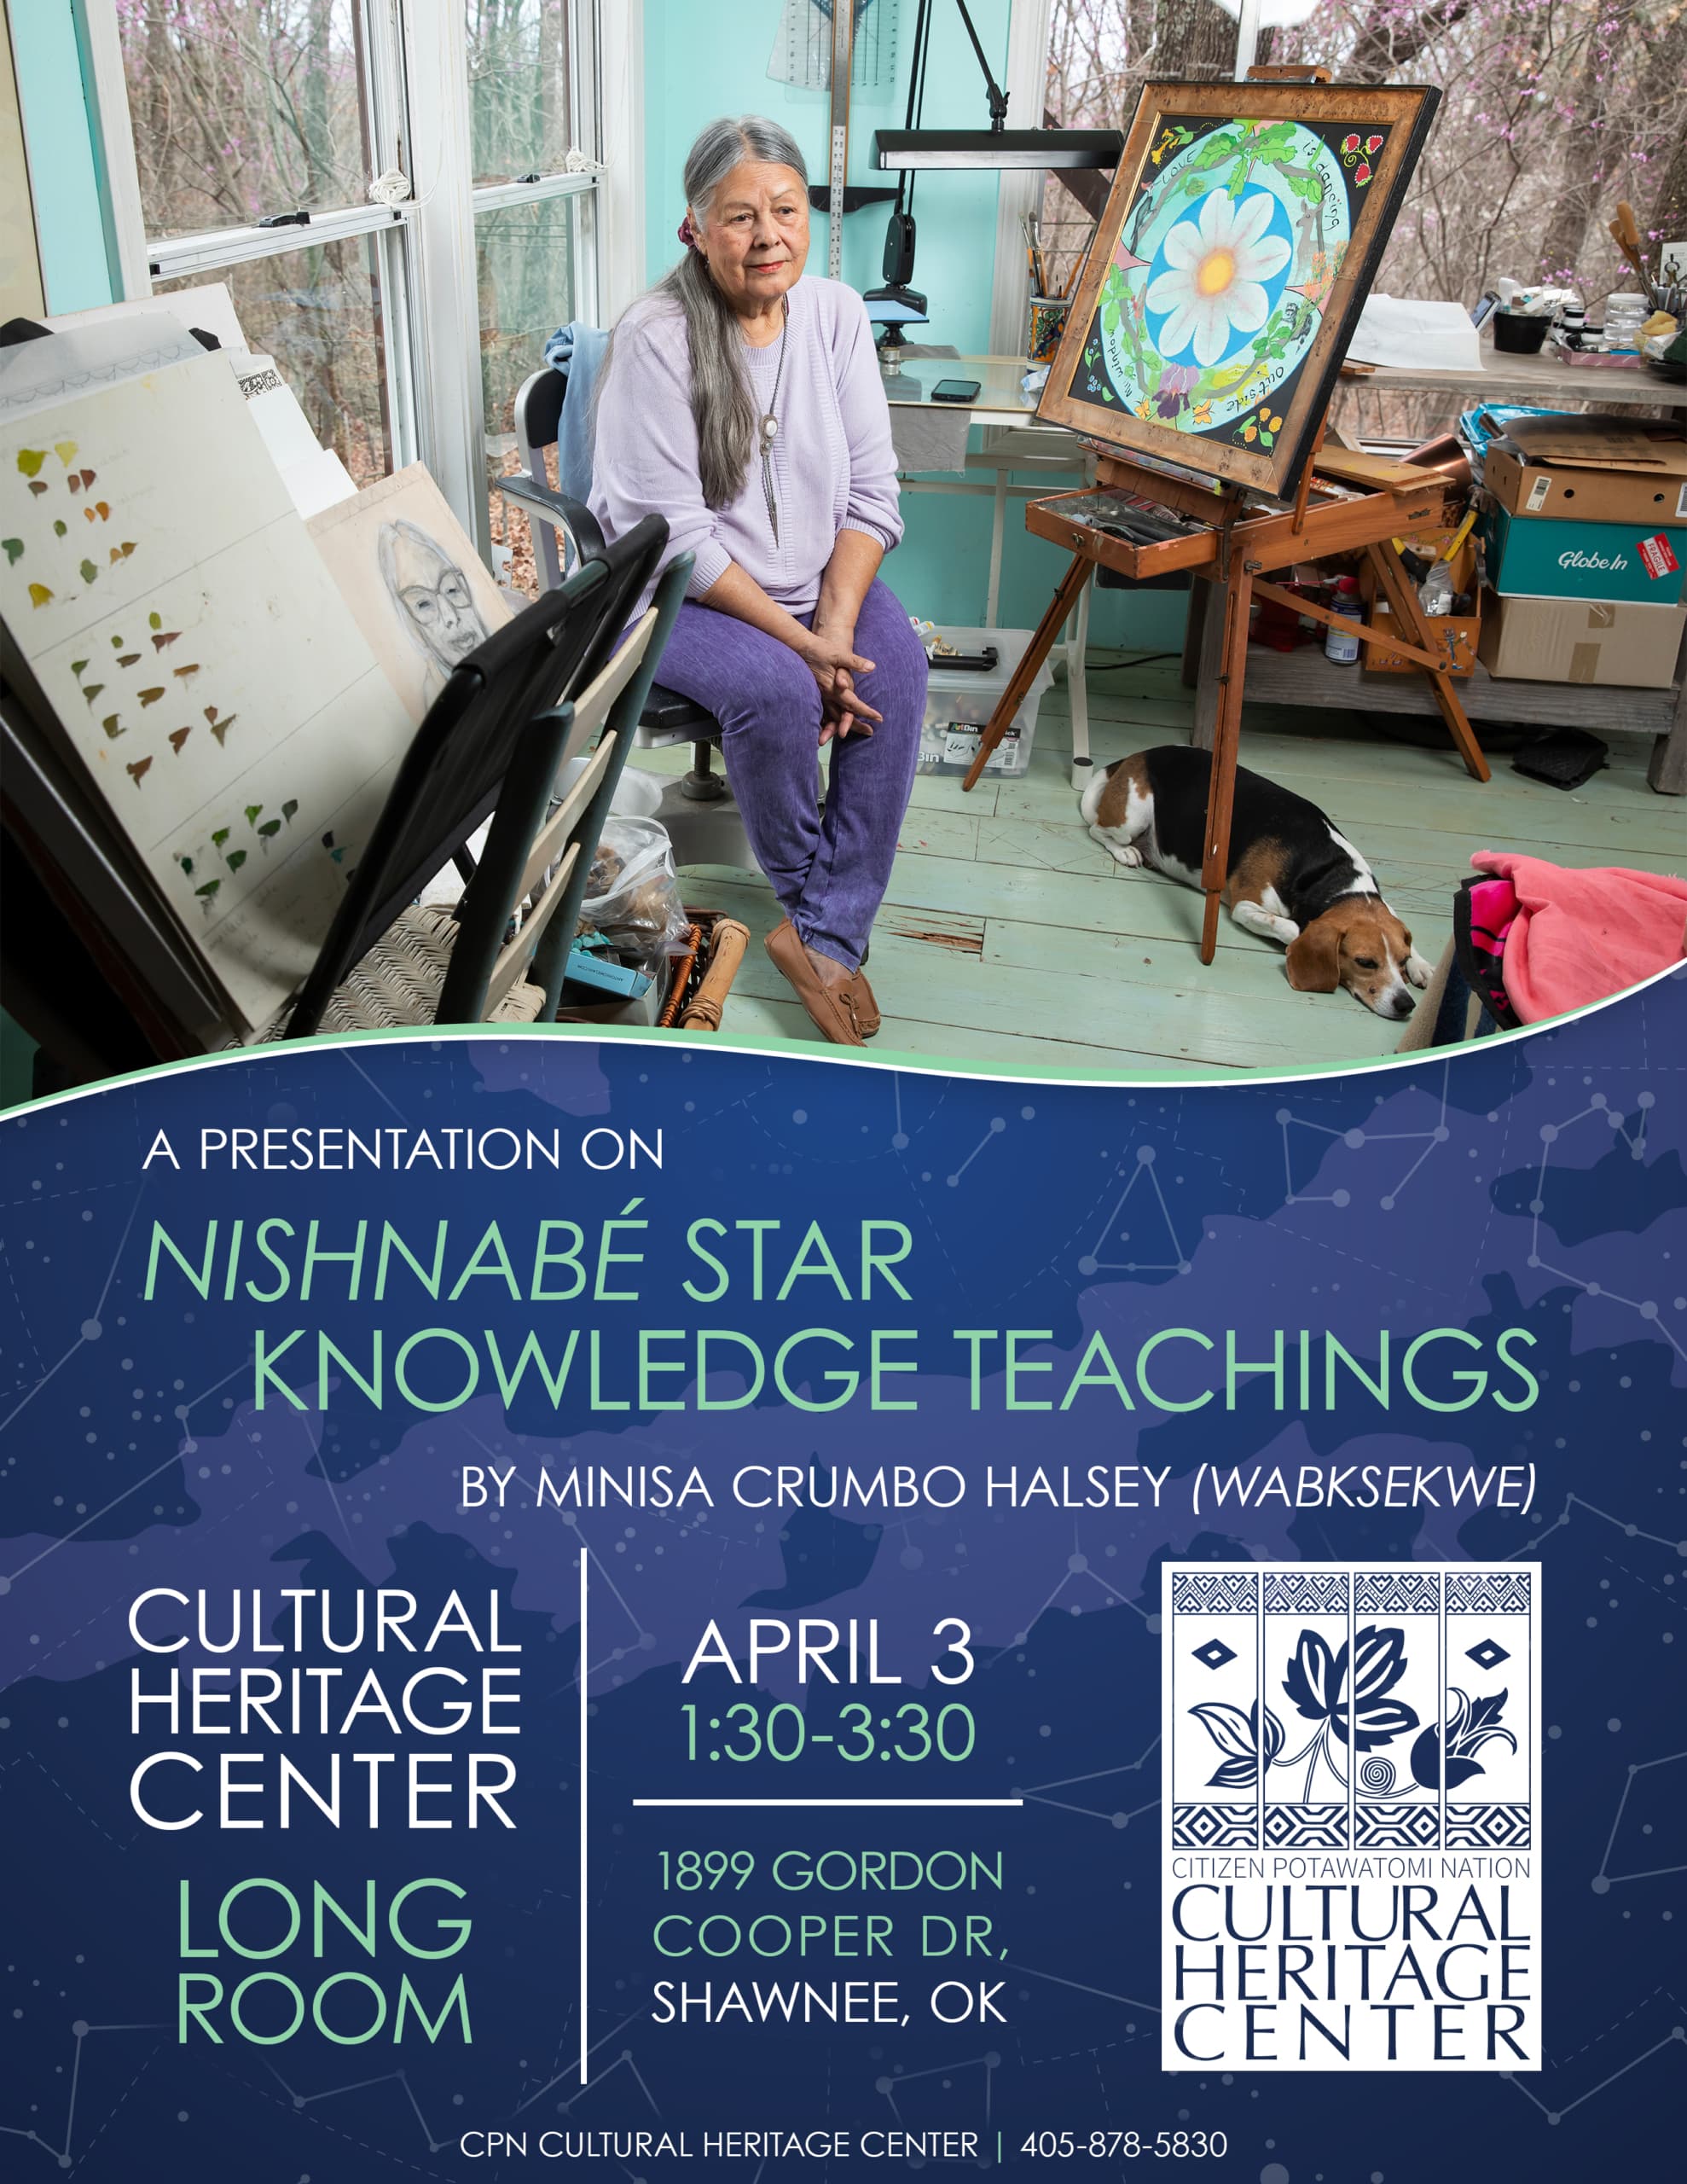 At the top, a photo of Minisa Crumbo Halsey wearing shades of purple and sitting in her art studio with a beagle beneath her easel. Below, constellations on a blue background behind white and green text announcing a presentation on Nishnabe Star Knowledge Teachings at the CPN Cultural Heritage Center on April 3, 2024, at 1:30 p.m.